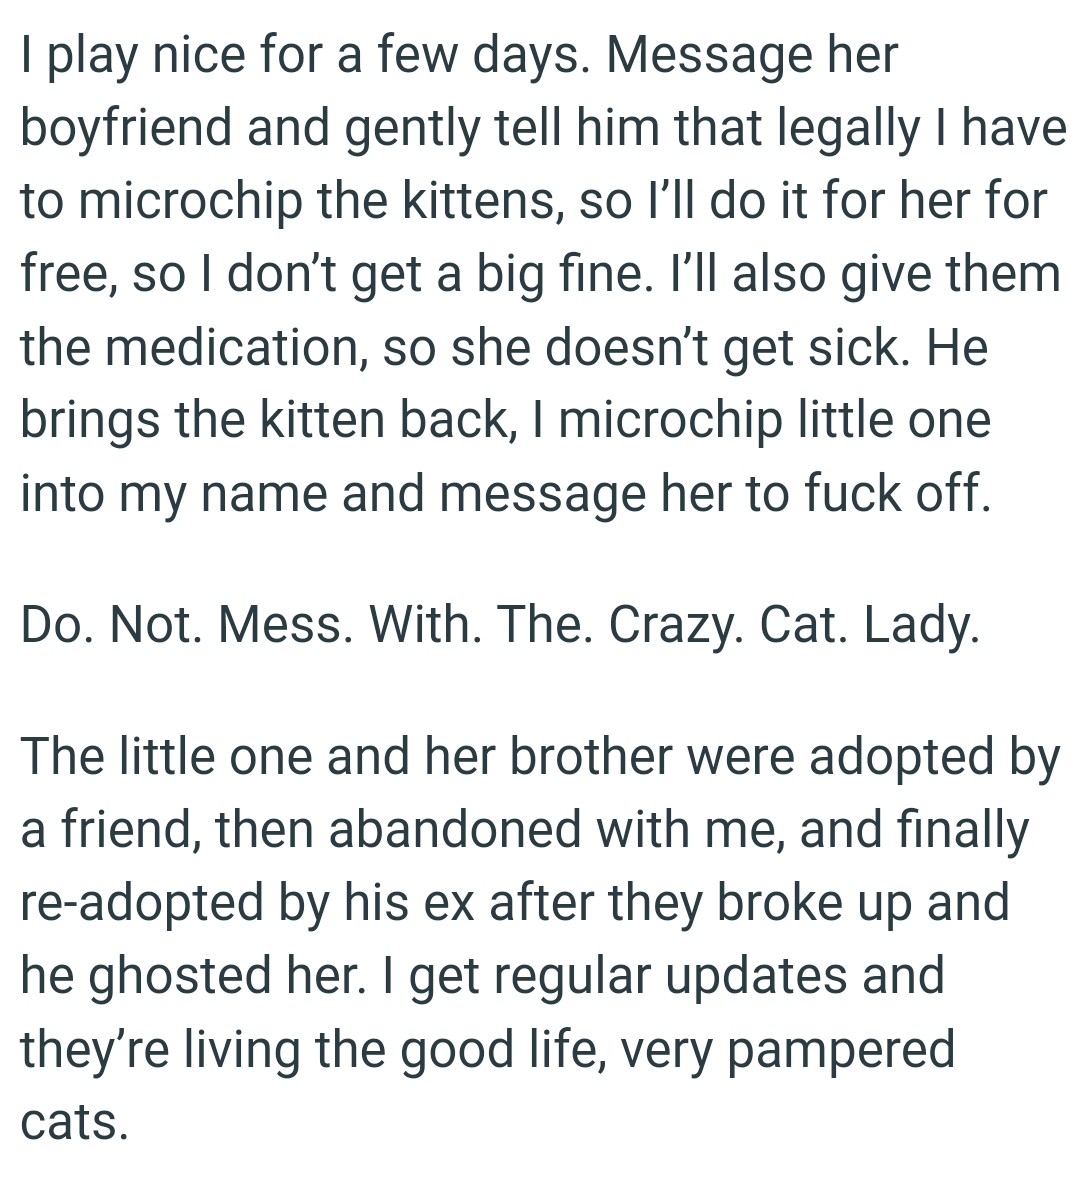 The guy brings the kitten back and the OP microchipped the little one into her name and message her ex-roommate